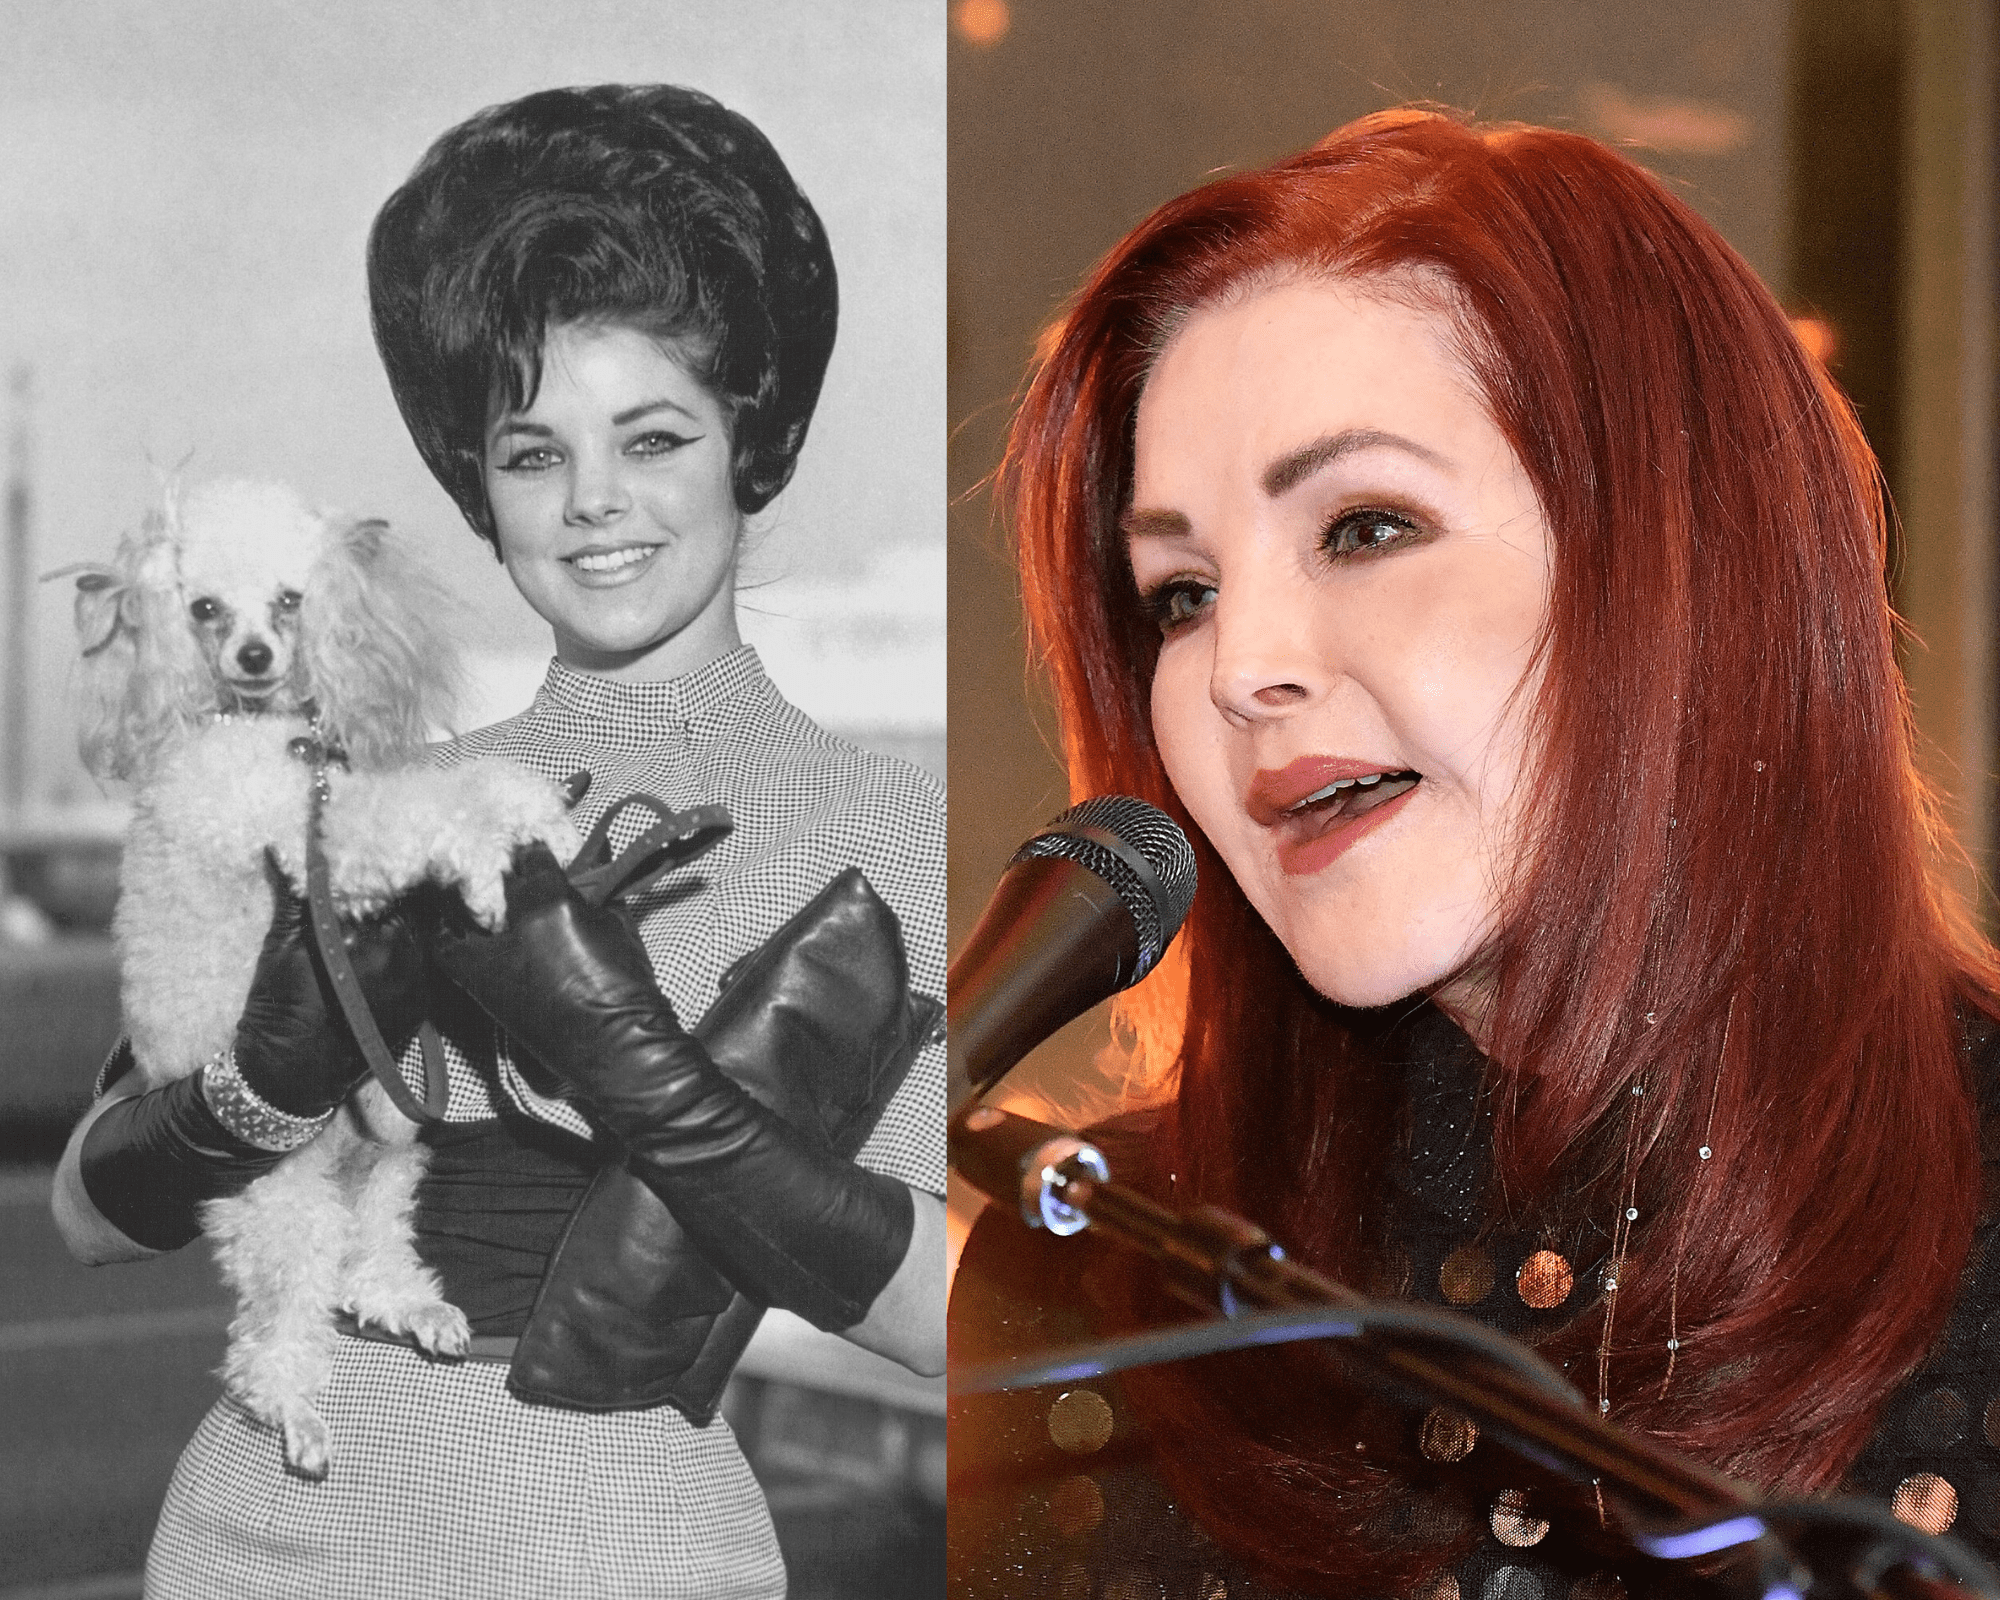 Priscilla Presley with her dog in Memphis, Tennessee on January 11, 1963 | Priscilla Presley on January 05, 2023 in Orlando, Florida | Getty Images 